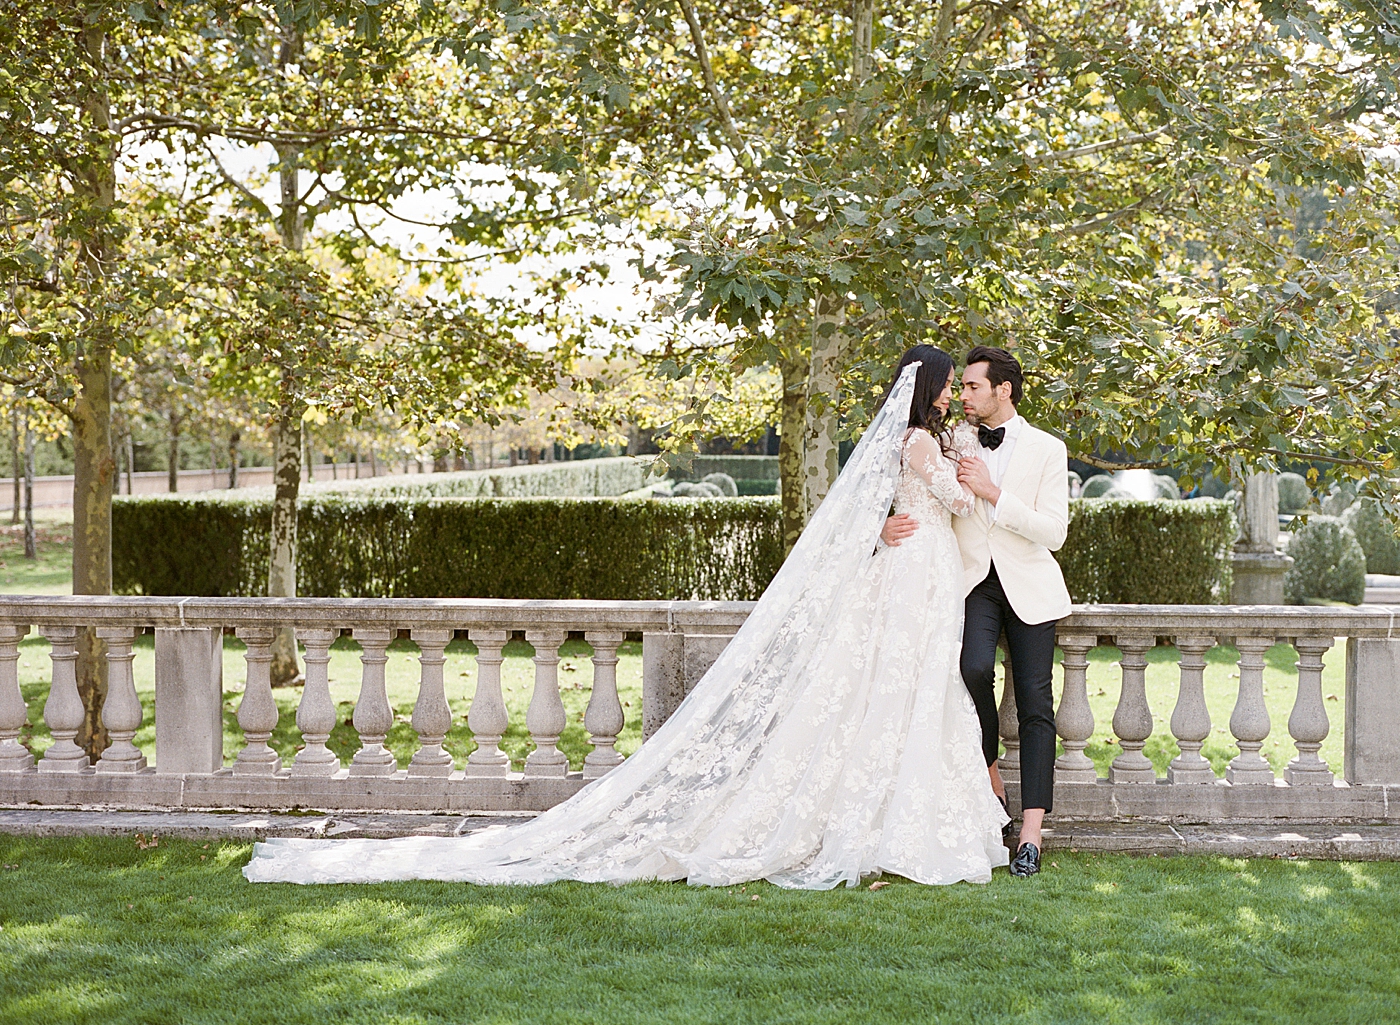 Portrait of bride and groom embracing in the garden during Oheka castle wedding | Image by Hope Helmuth Photography